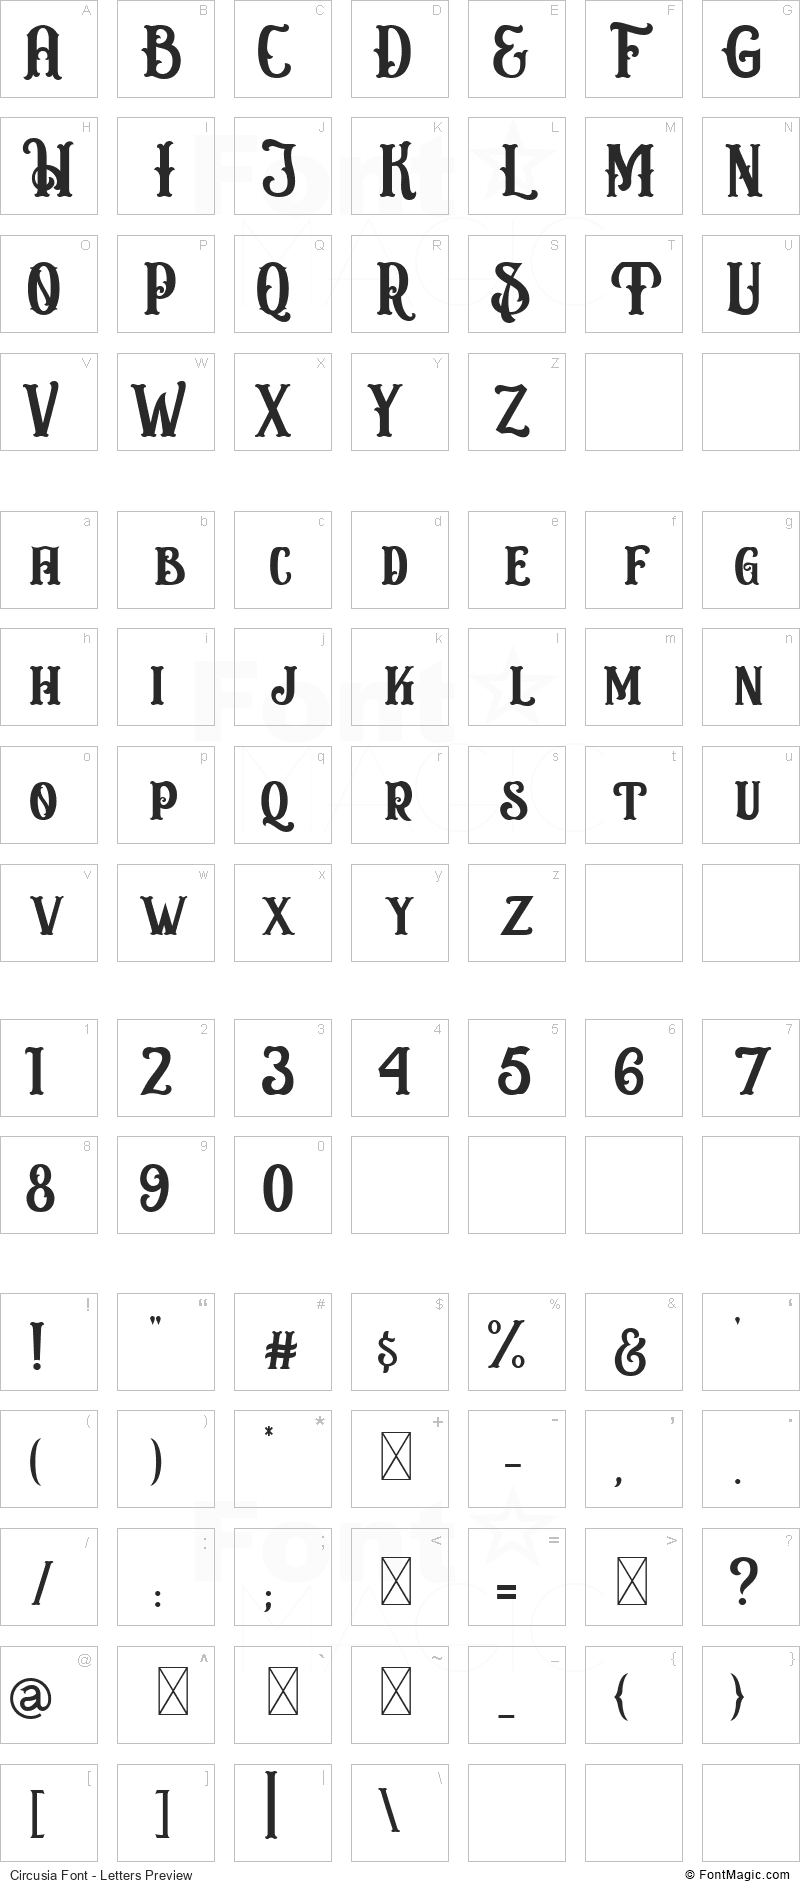 Circusia Font - All Latters Preview Chart